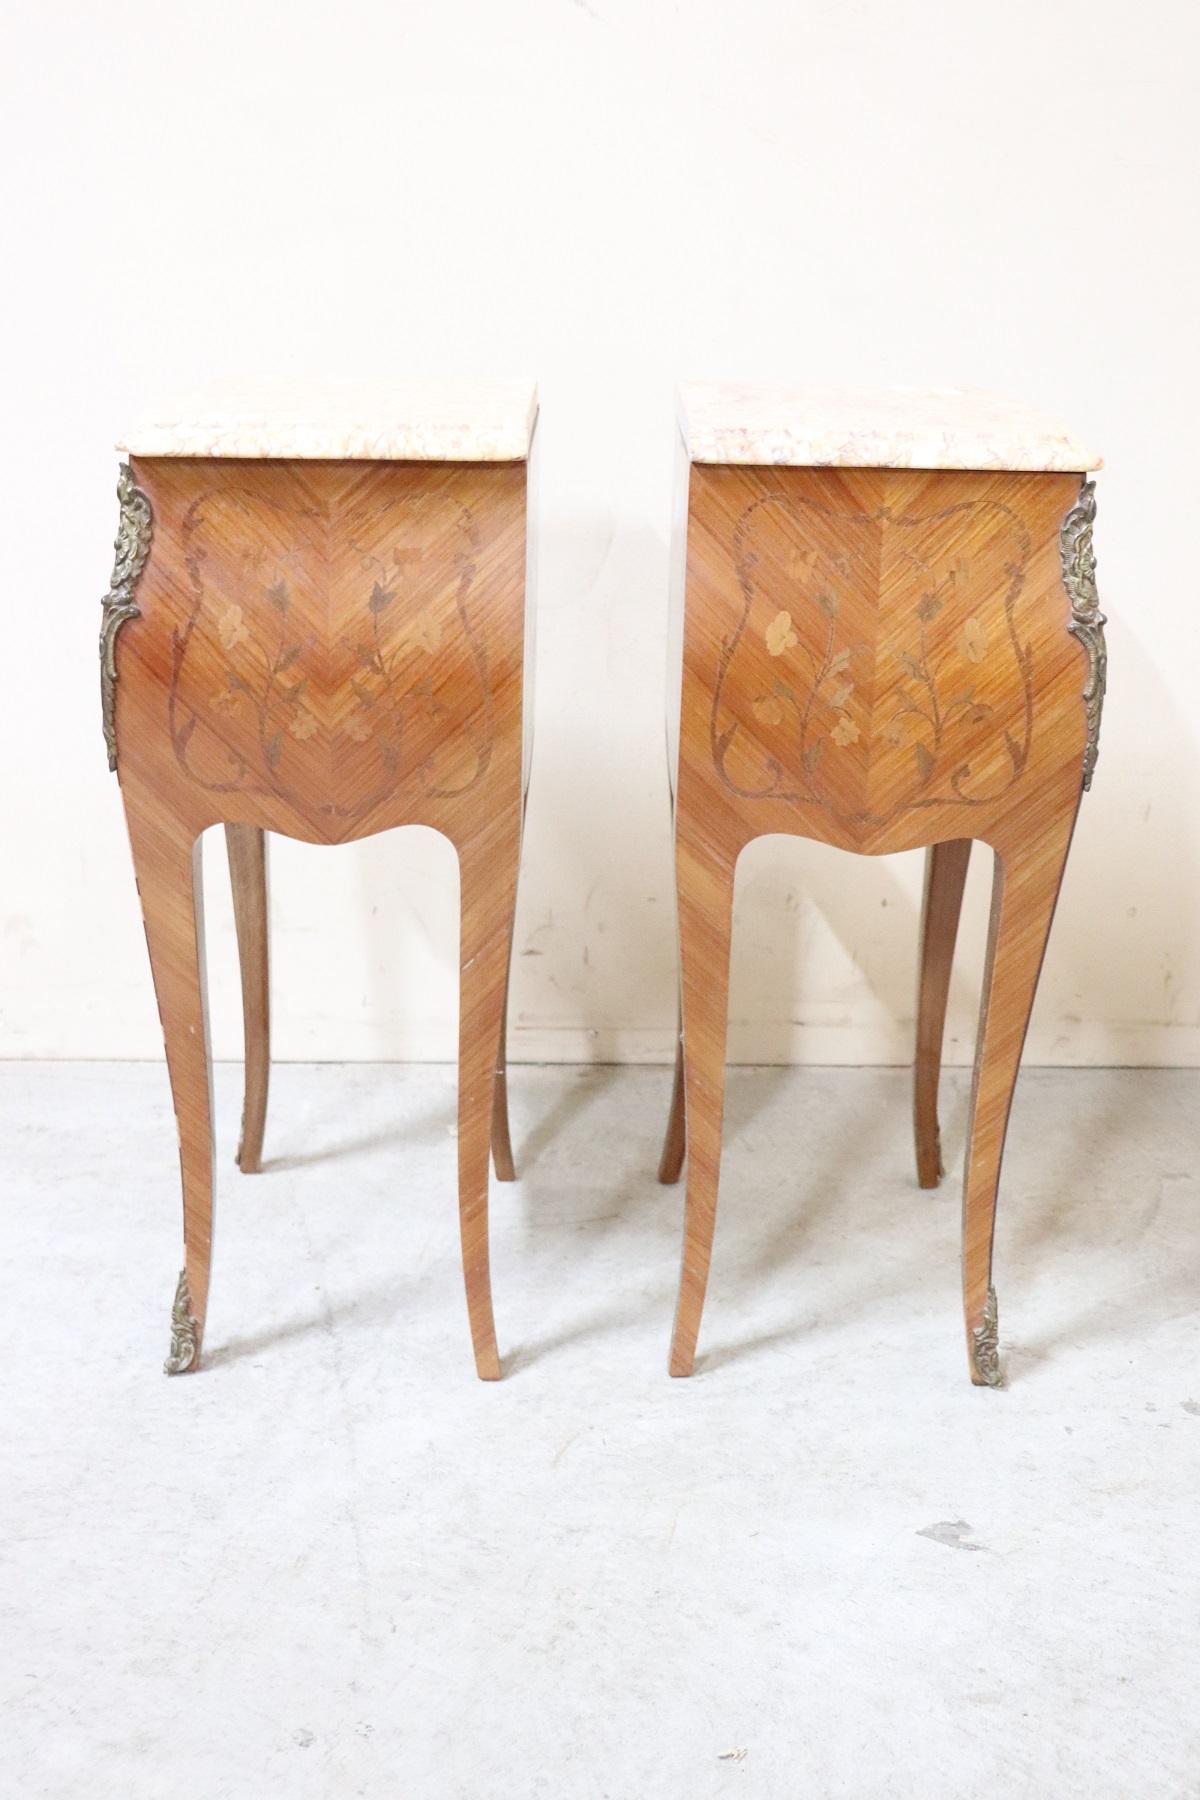 Marble 20th Century French Louis XV Style Inlay Wood Golden Bronzes Pair of Nightstands